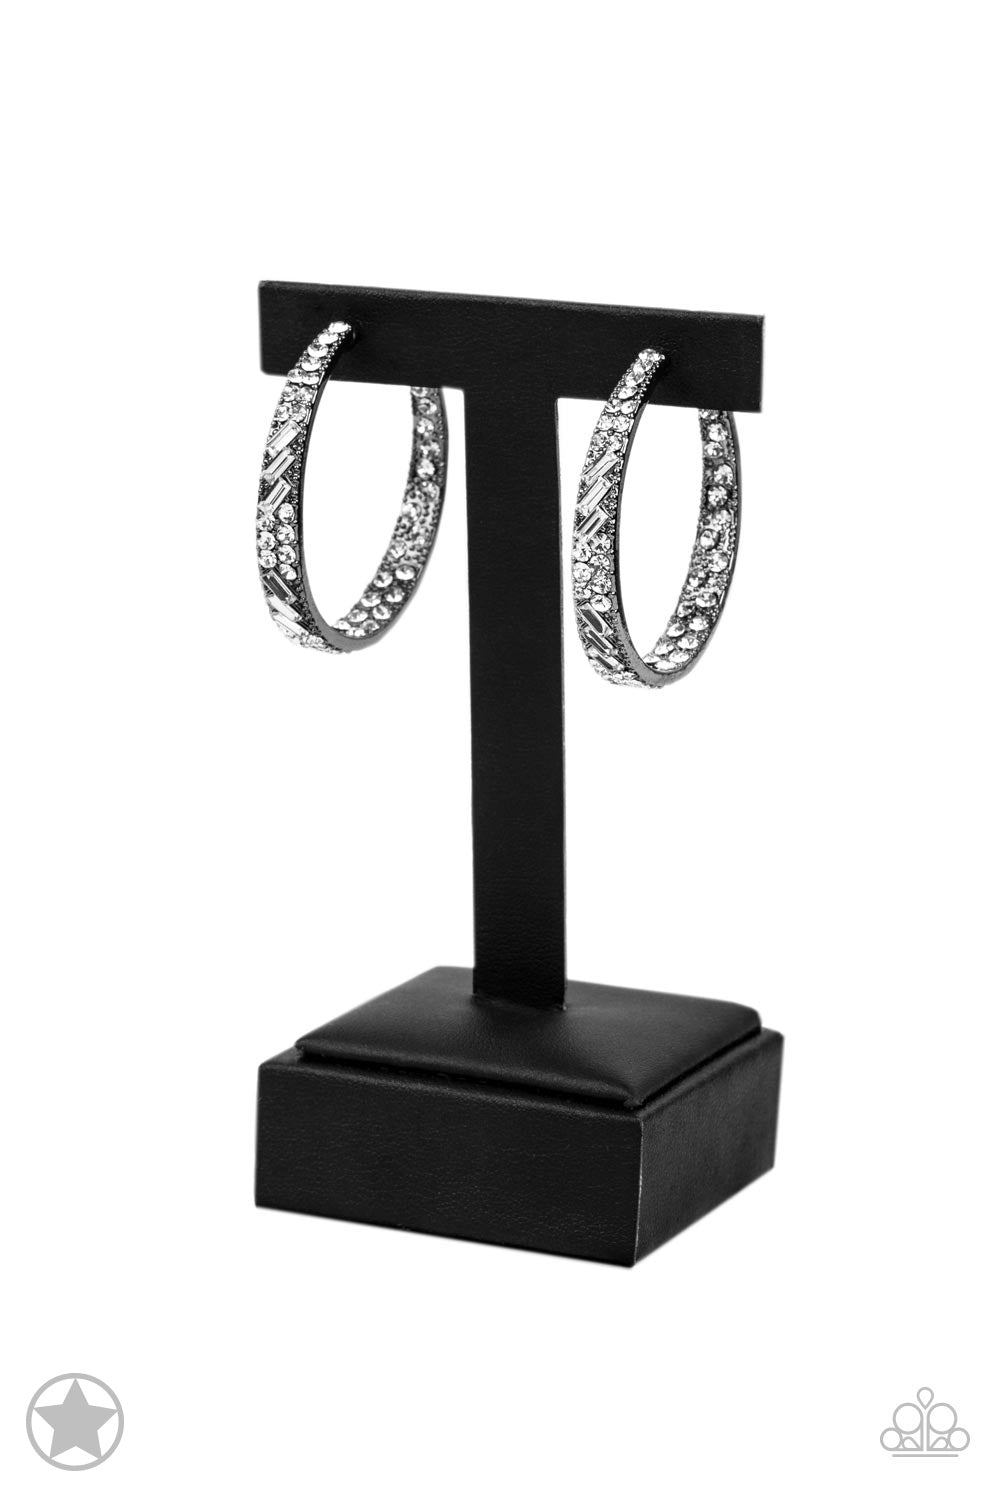 GLITZY By Association - Black/White Earrings - Paparazzi Accessories 